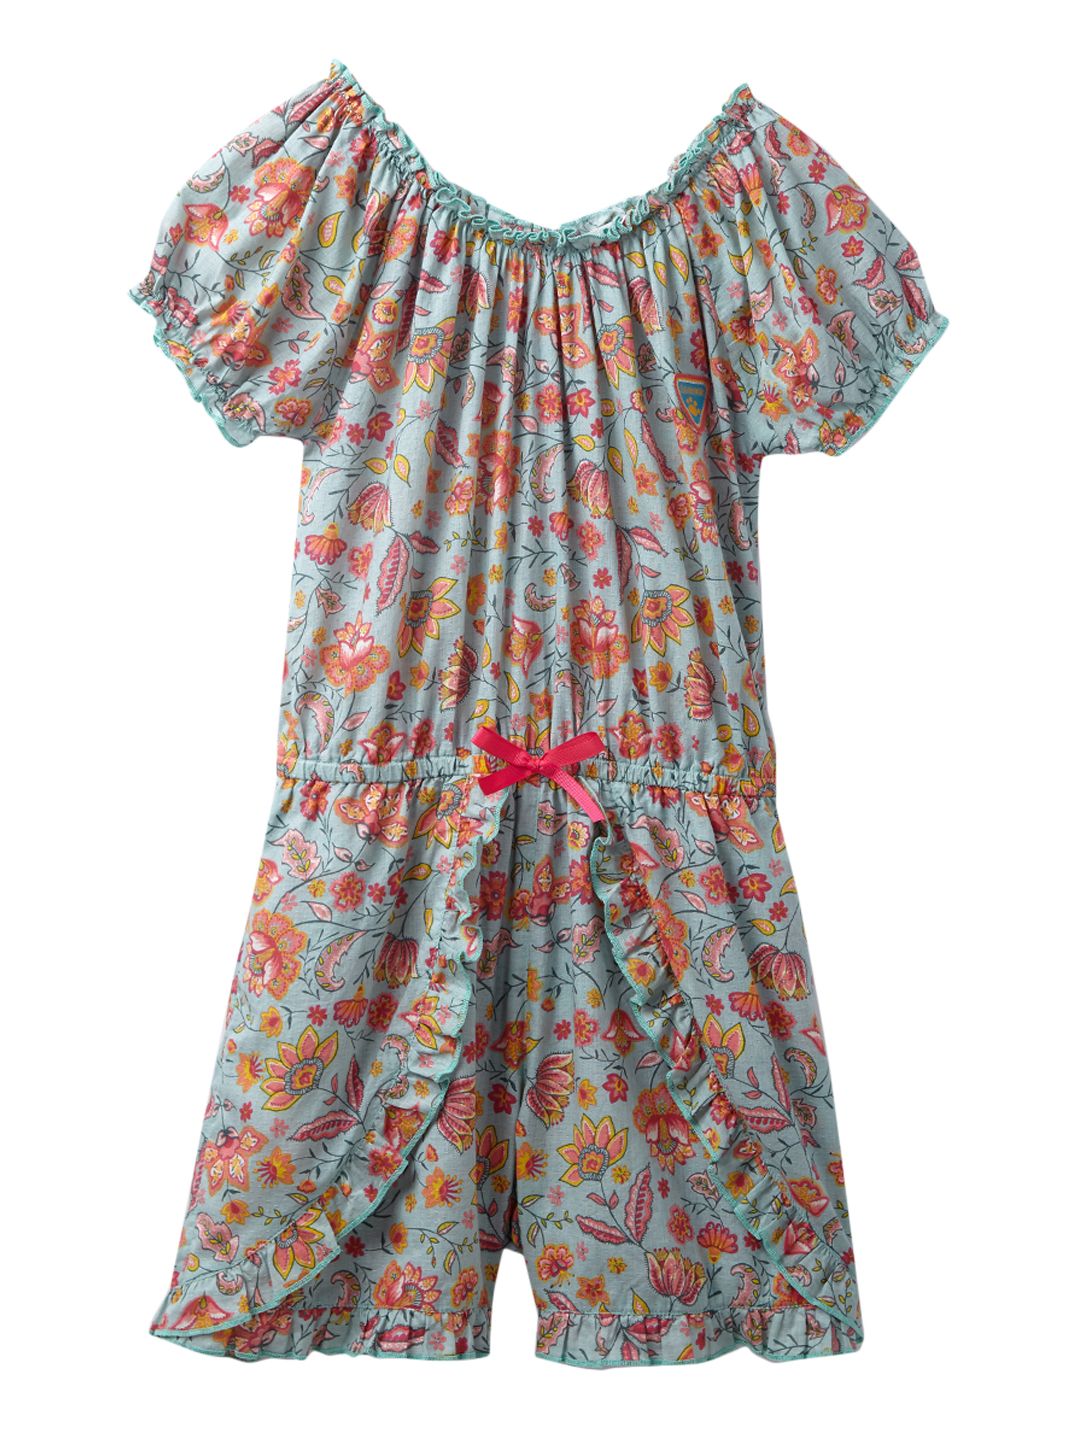 Floral Girls Playsuit online at Discount Prices | Cub McPaws